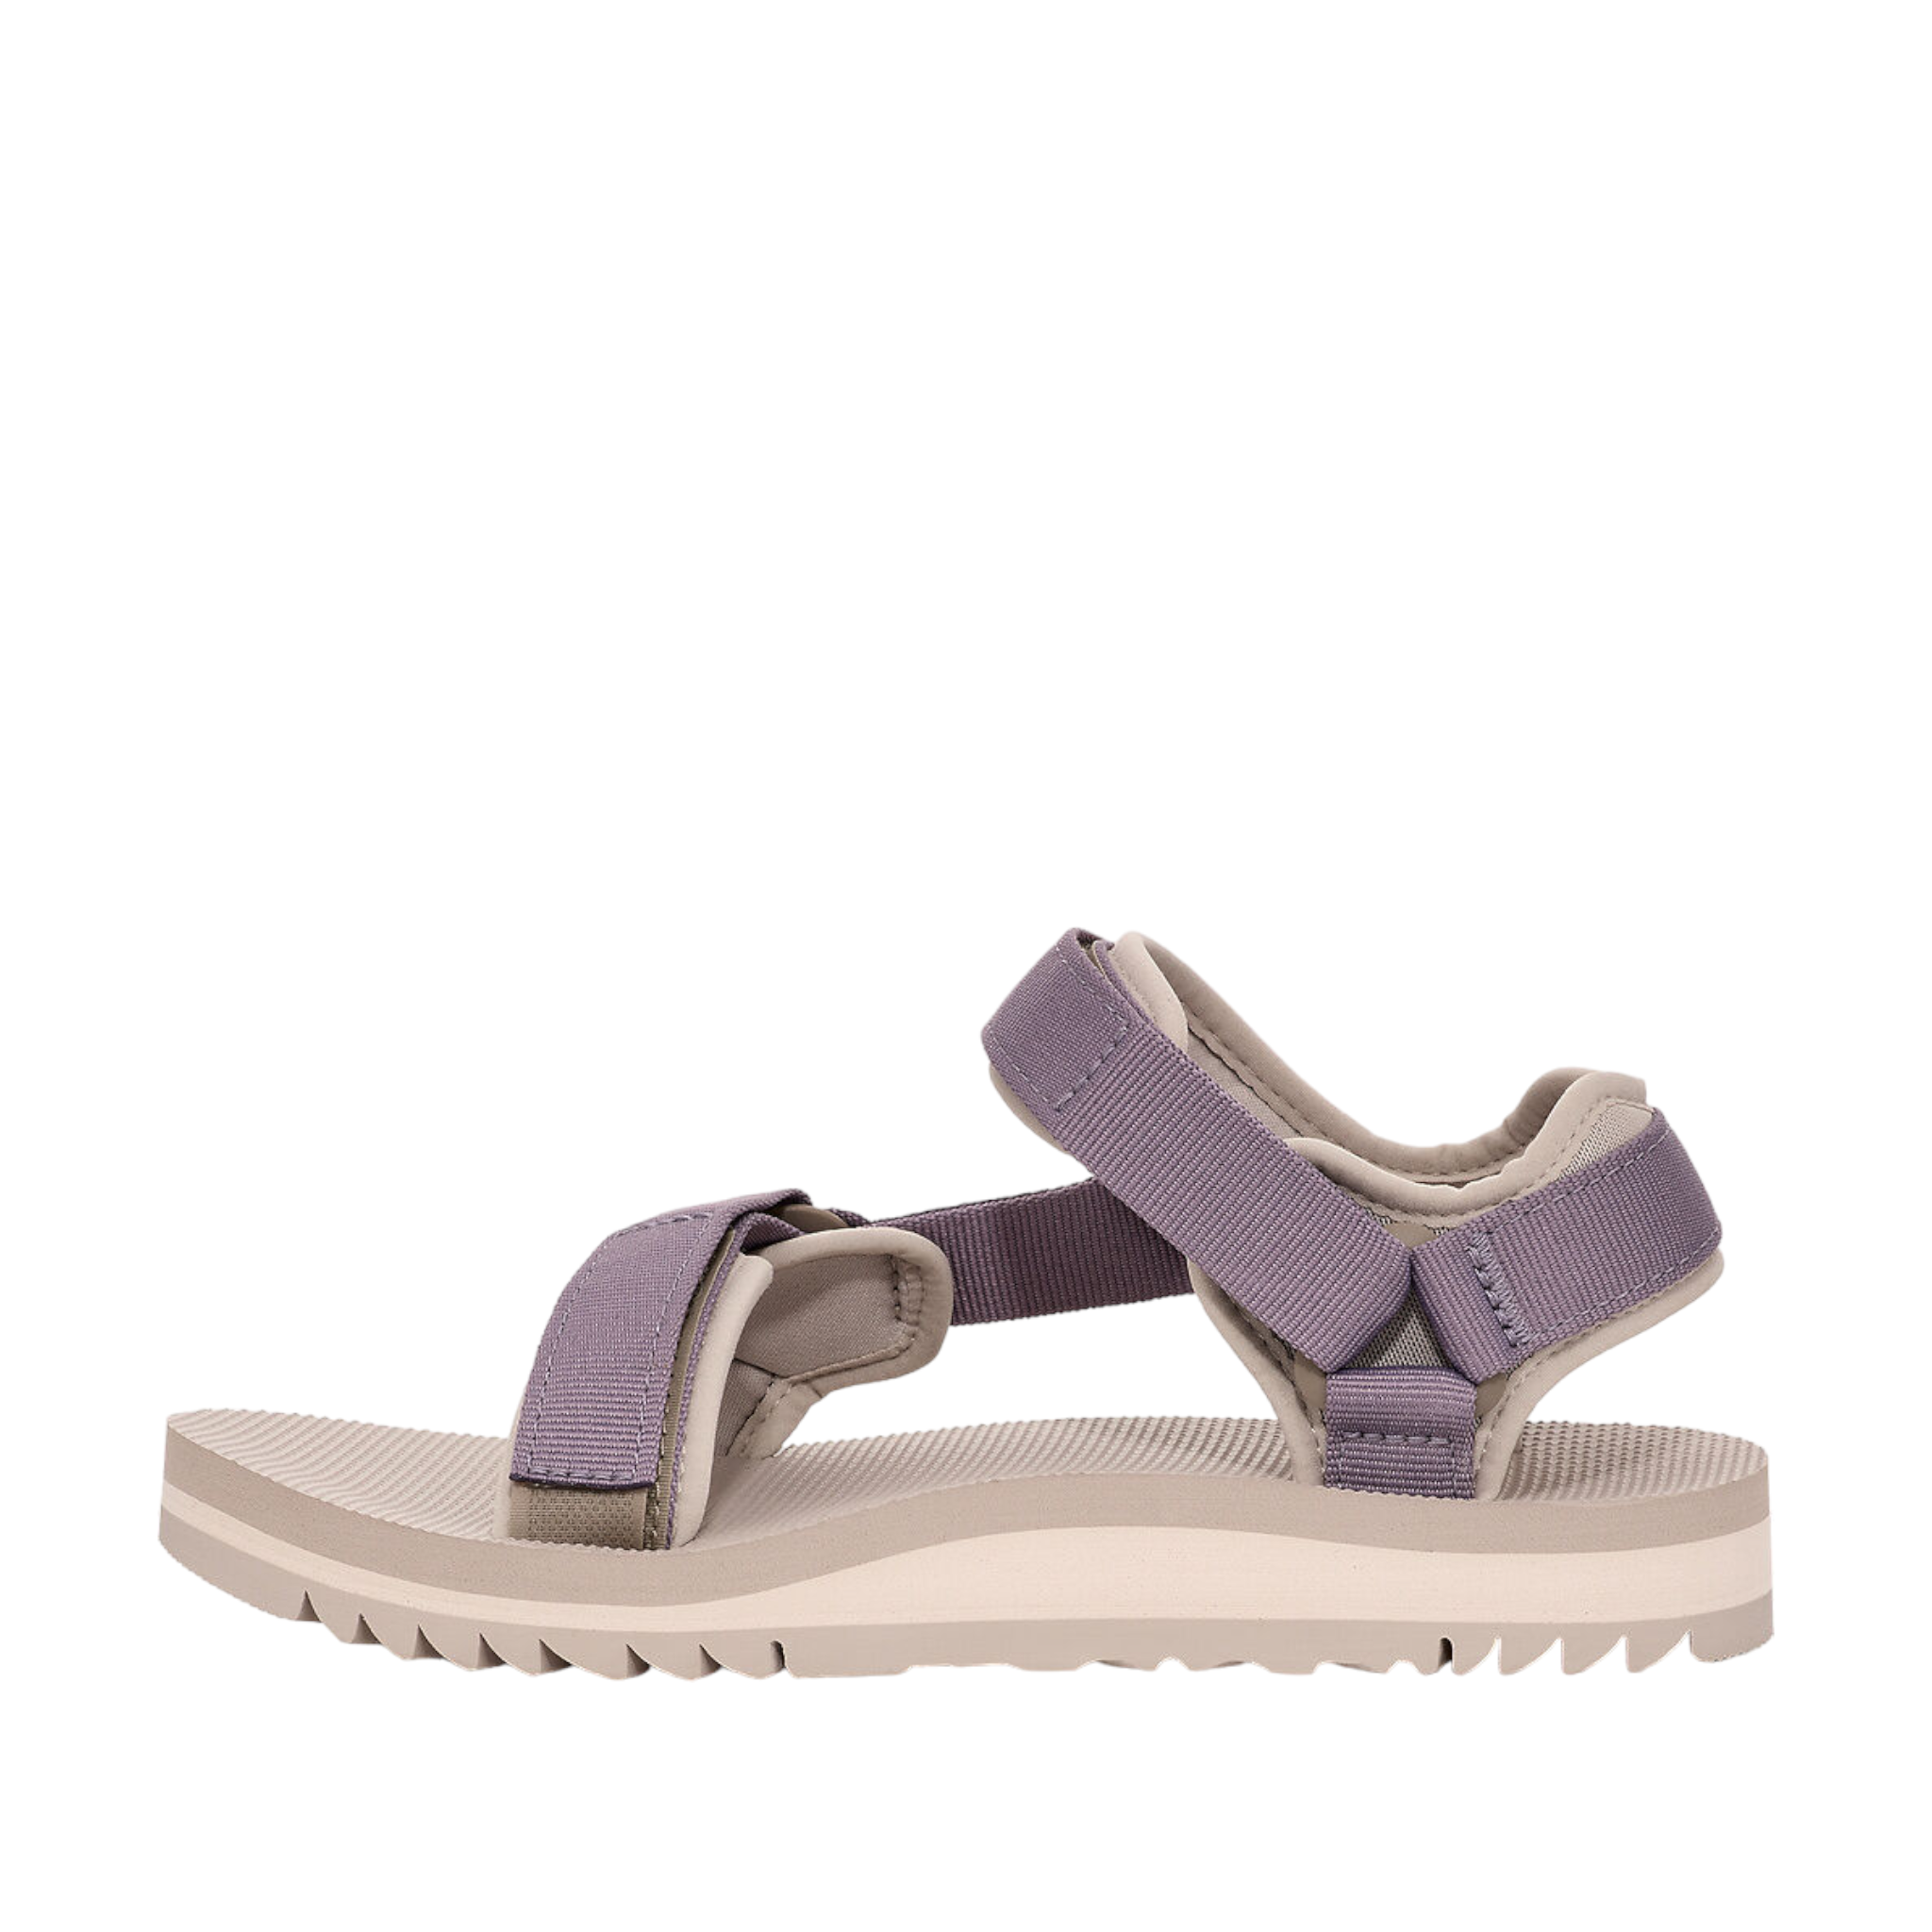 Shop W Universal Trail - with shoe&amp;me - from Teva - Sandals - Sandal, Summer, Womens